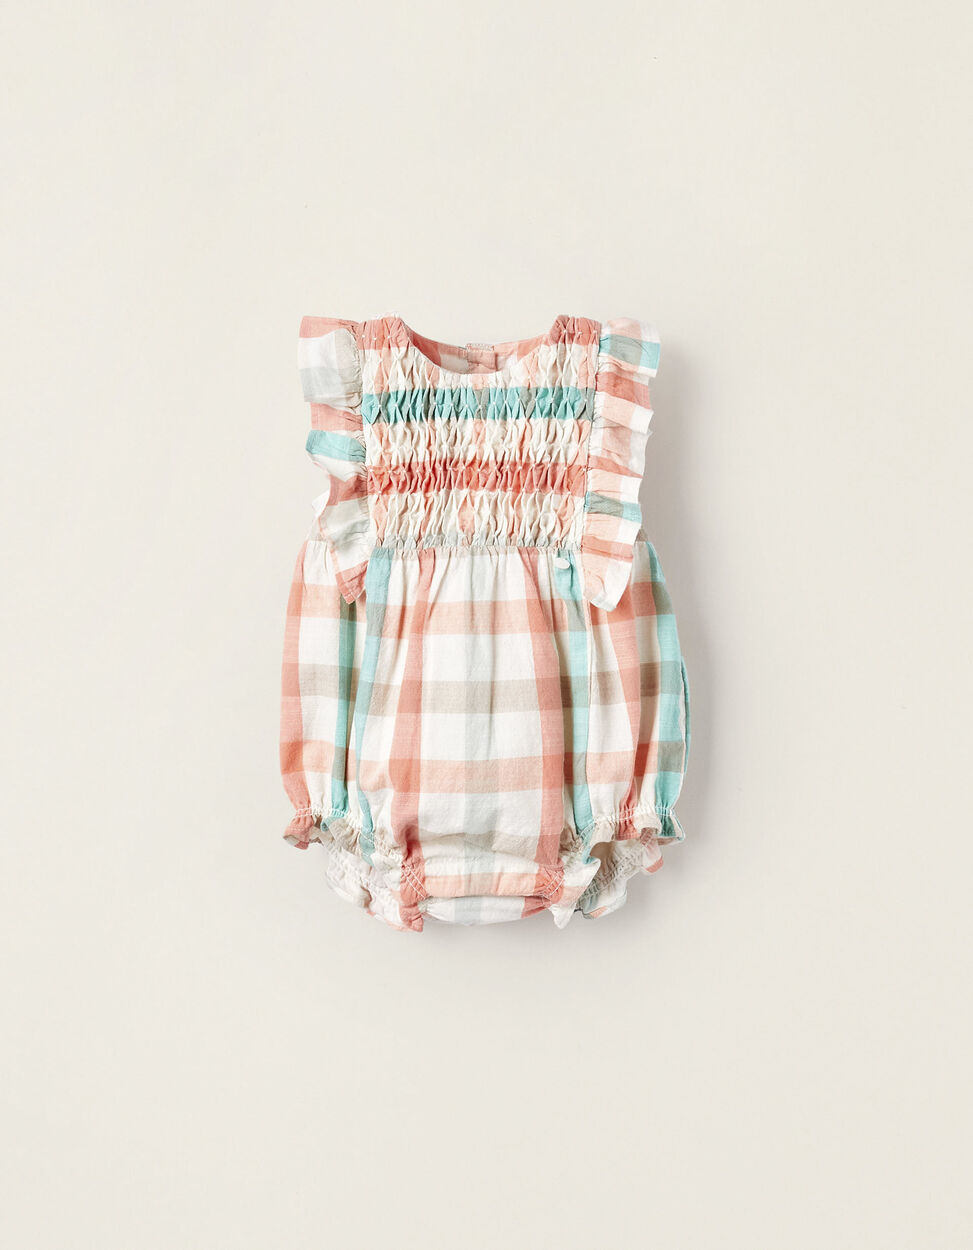 Buy Online Plaid Cotton Jumpsuit for Newborn Girls 'B&S', Coral/Green Water